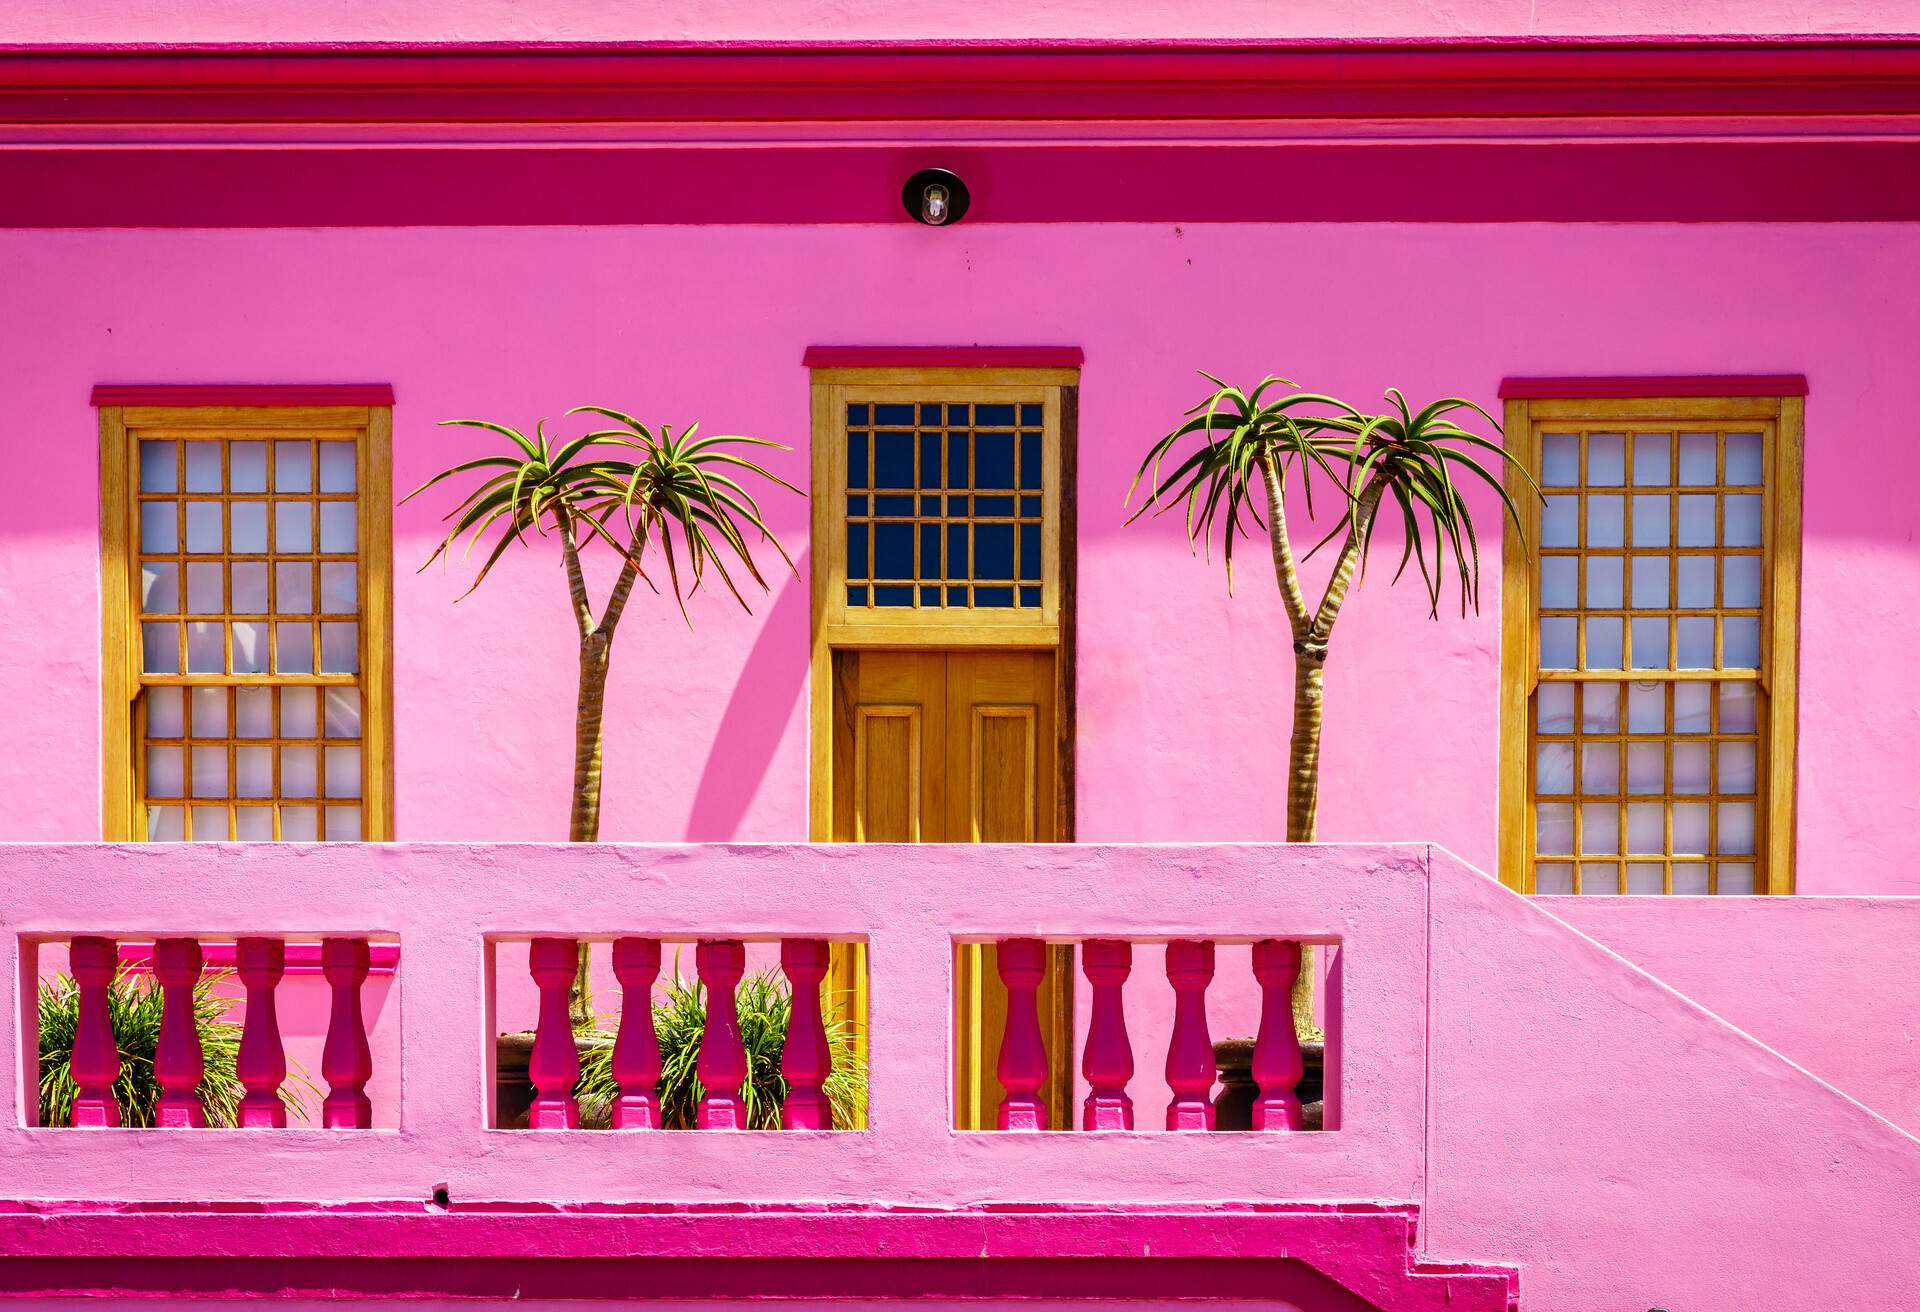 dest_south-africa_cape-town_bo-kaap_gettyimages-1027228758_universal_within-usage-period_88818